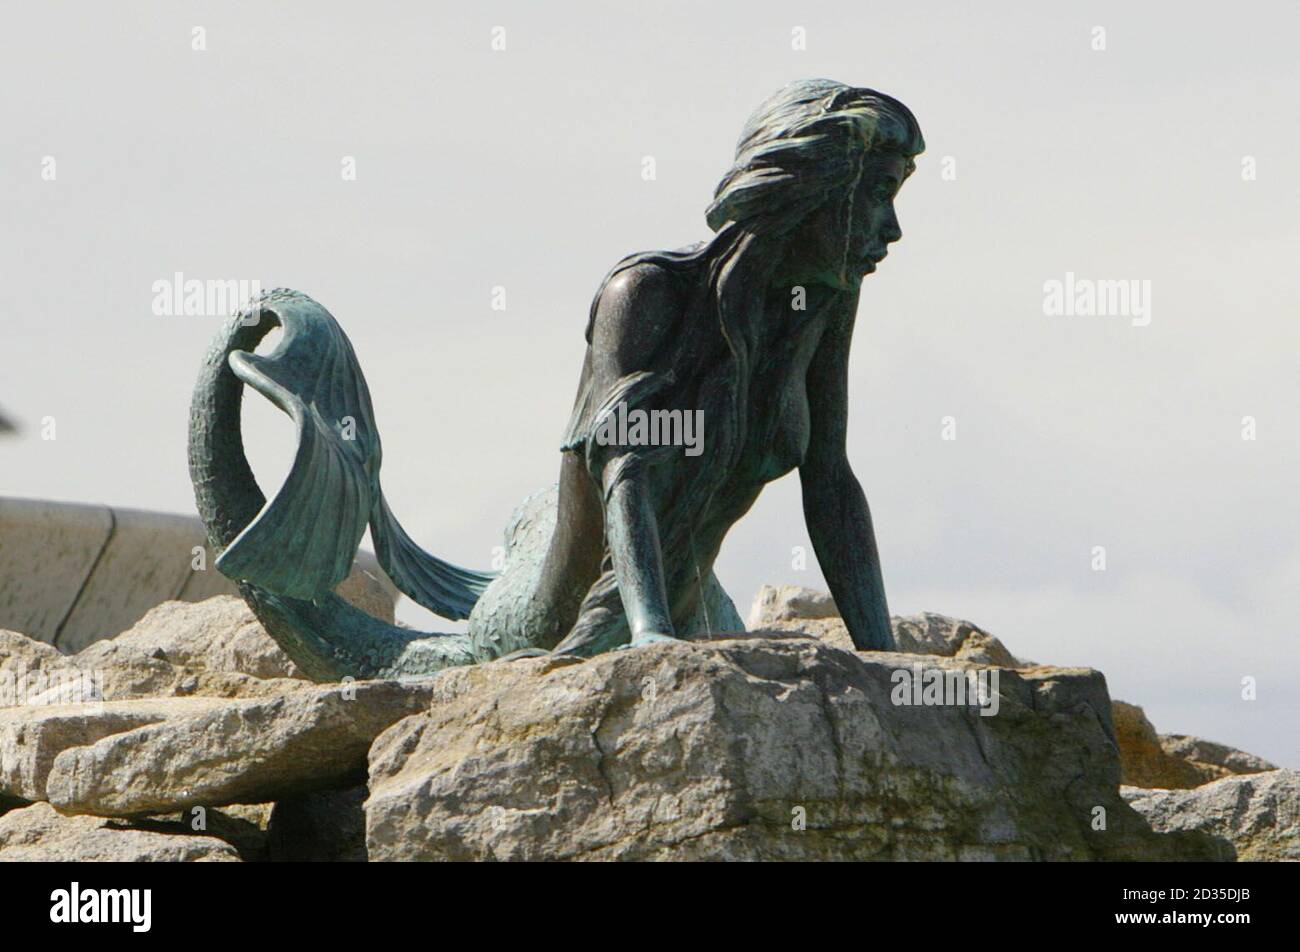 General view of the mermaid sculpture on the rocks of the breakwater at the Royal Yacht Squadron in Cowes on the Isle of Wight. It was modelled on the former Olympic swimmer Sharron Davies. Stock Photo